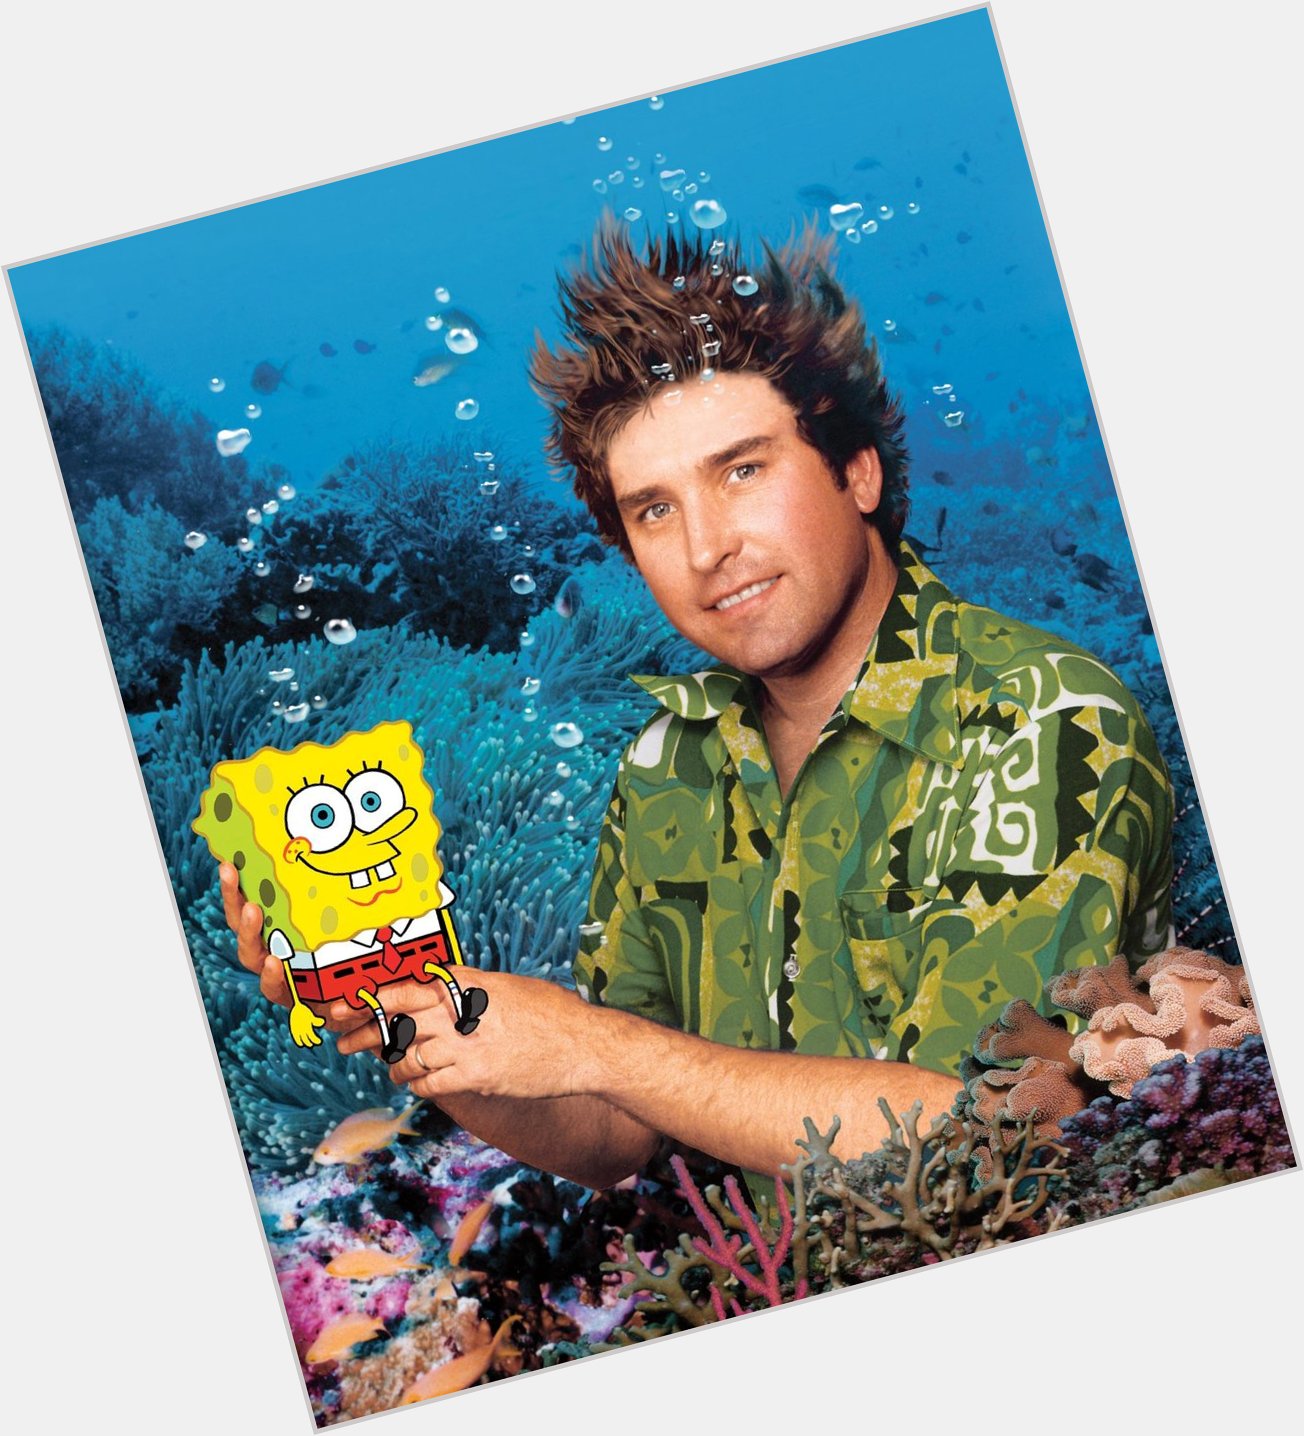 Also happy 60th birthday to Stephen Hillenburg, you absolute legend, May you be resting in peace dude 